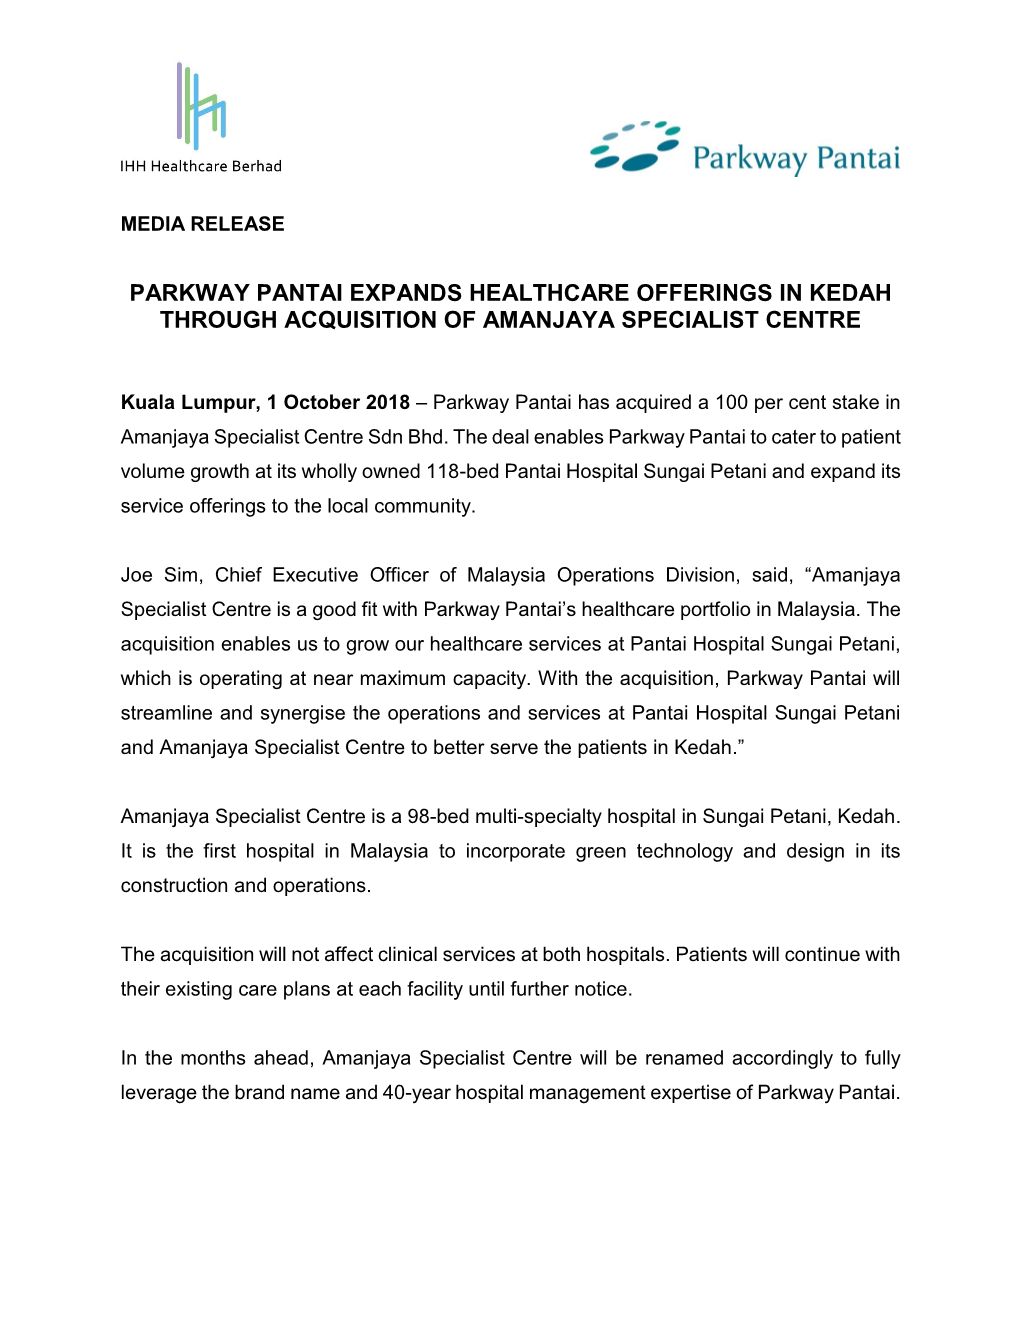 Parkway Pantai Expands Healthcare Offerings in Kedah Through Acquisition of Amanjaya Specialist Centre